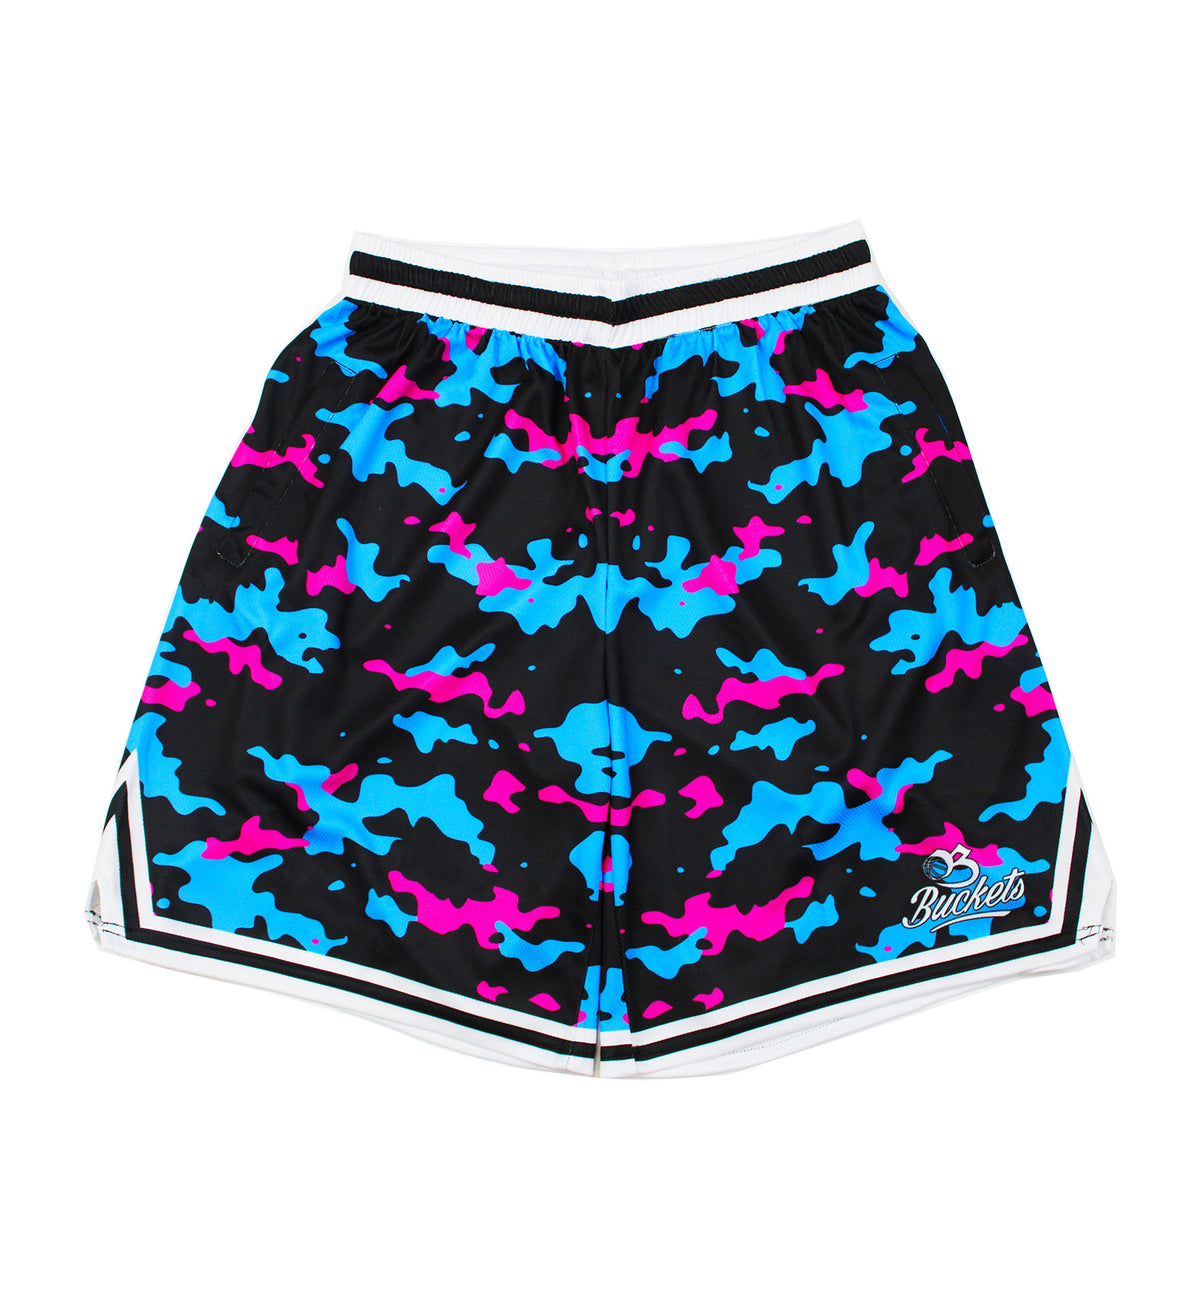 In Disguise Shorts - South Beach